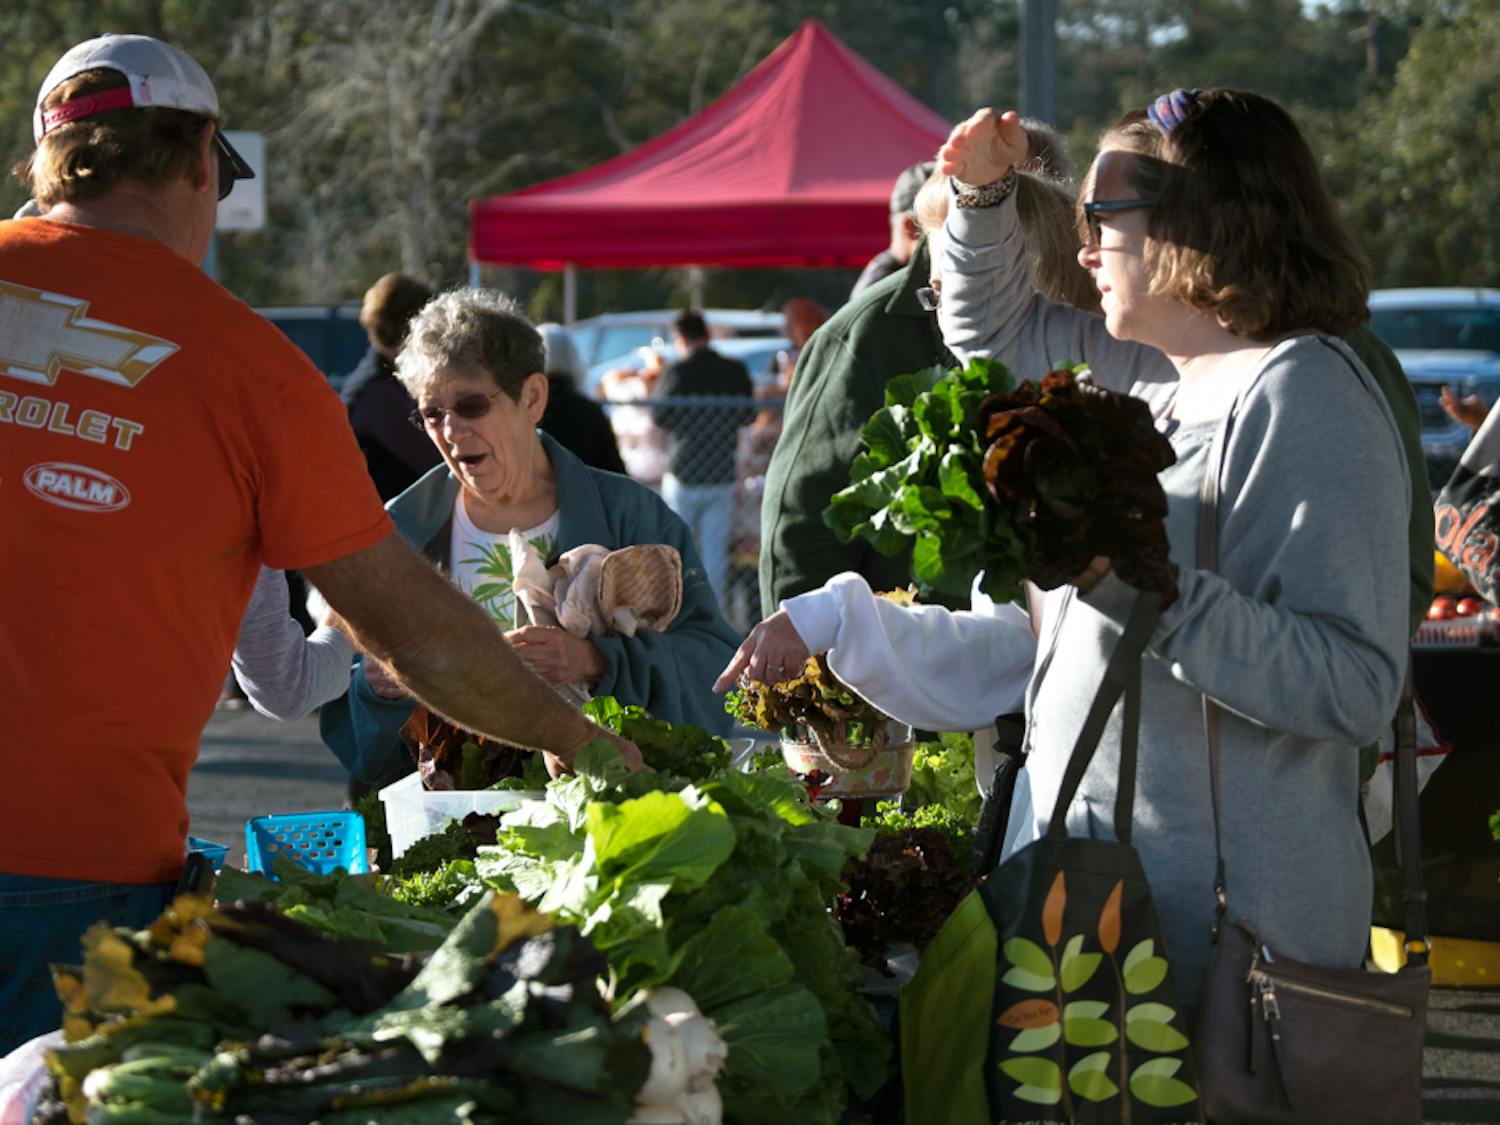 Rana Hyder, 42, right, waits to purchase vegetables from Jones Family Farms Saturday at the Alachua County Farmers Market,&nbsp; at 5920 NW 13th St. The market offers Fresh Access Bucks that make it easier for Supplemental Nutrition Assistance Program recipients to purchase local produce.